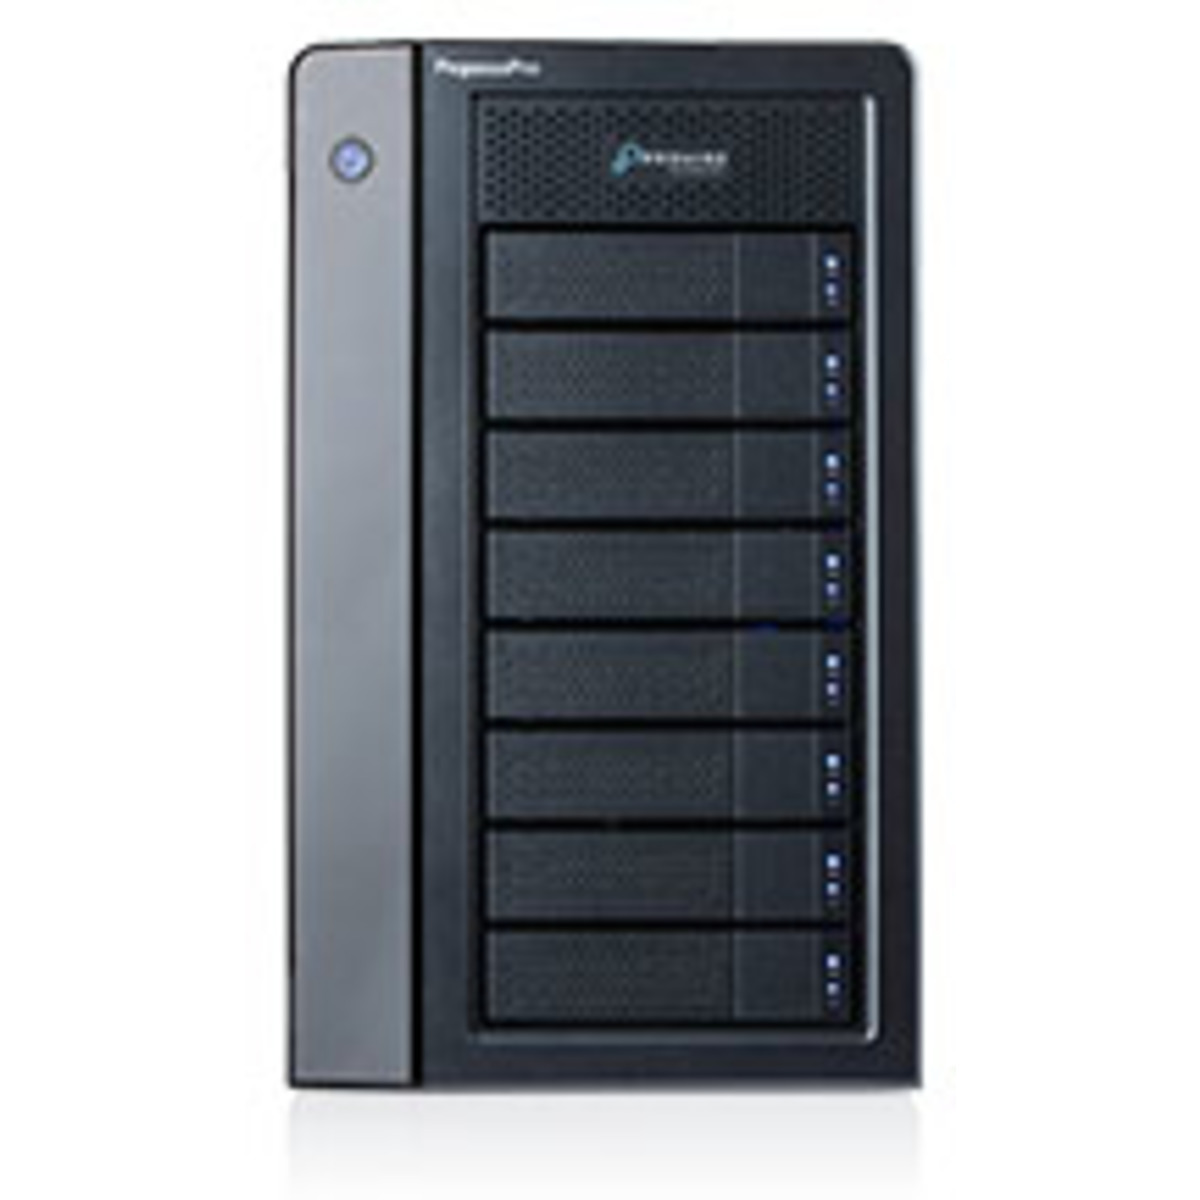 buy $8093 Promise Technology PegasusPro R8 64tb Desktop DAS-NAS - Combo Direct + Network Storage Device 8x8000gb Toshiba Enterprise Capacity MG08ADA800E 3.5 7200rpm SATA 6Gb/s HDD ENTERPRISE Class Drives Installed - Burn-In Tested - ON SALE - nas headquarters buy network attached storage server device das new raid-5 free shipping usa christmas new year holiday sale PegasusPro R8